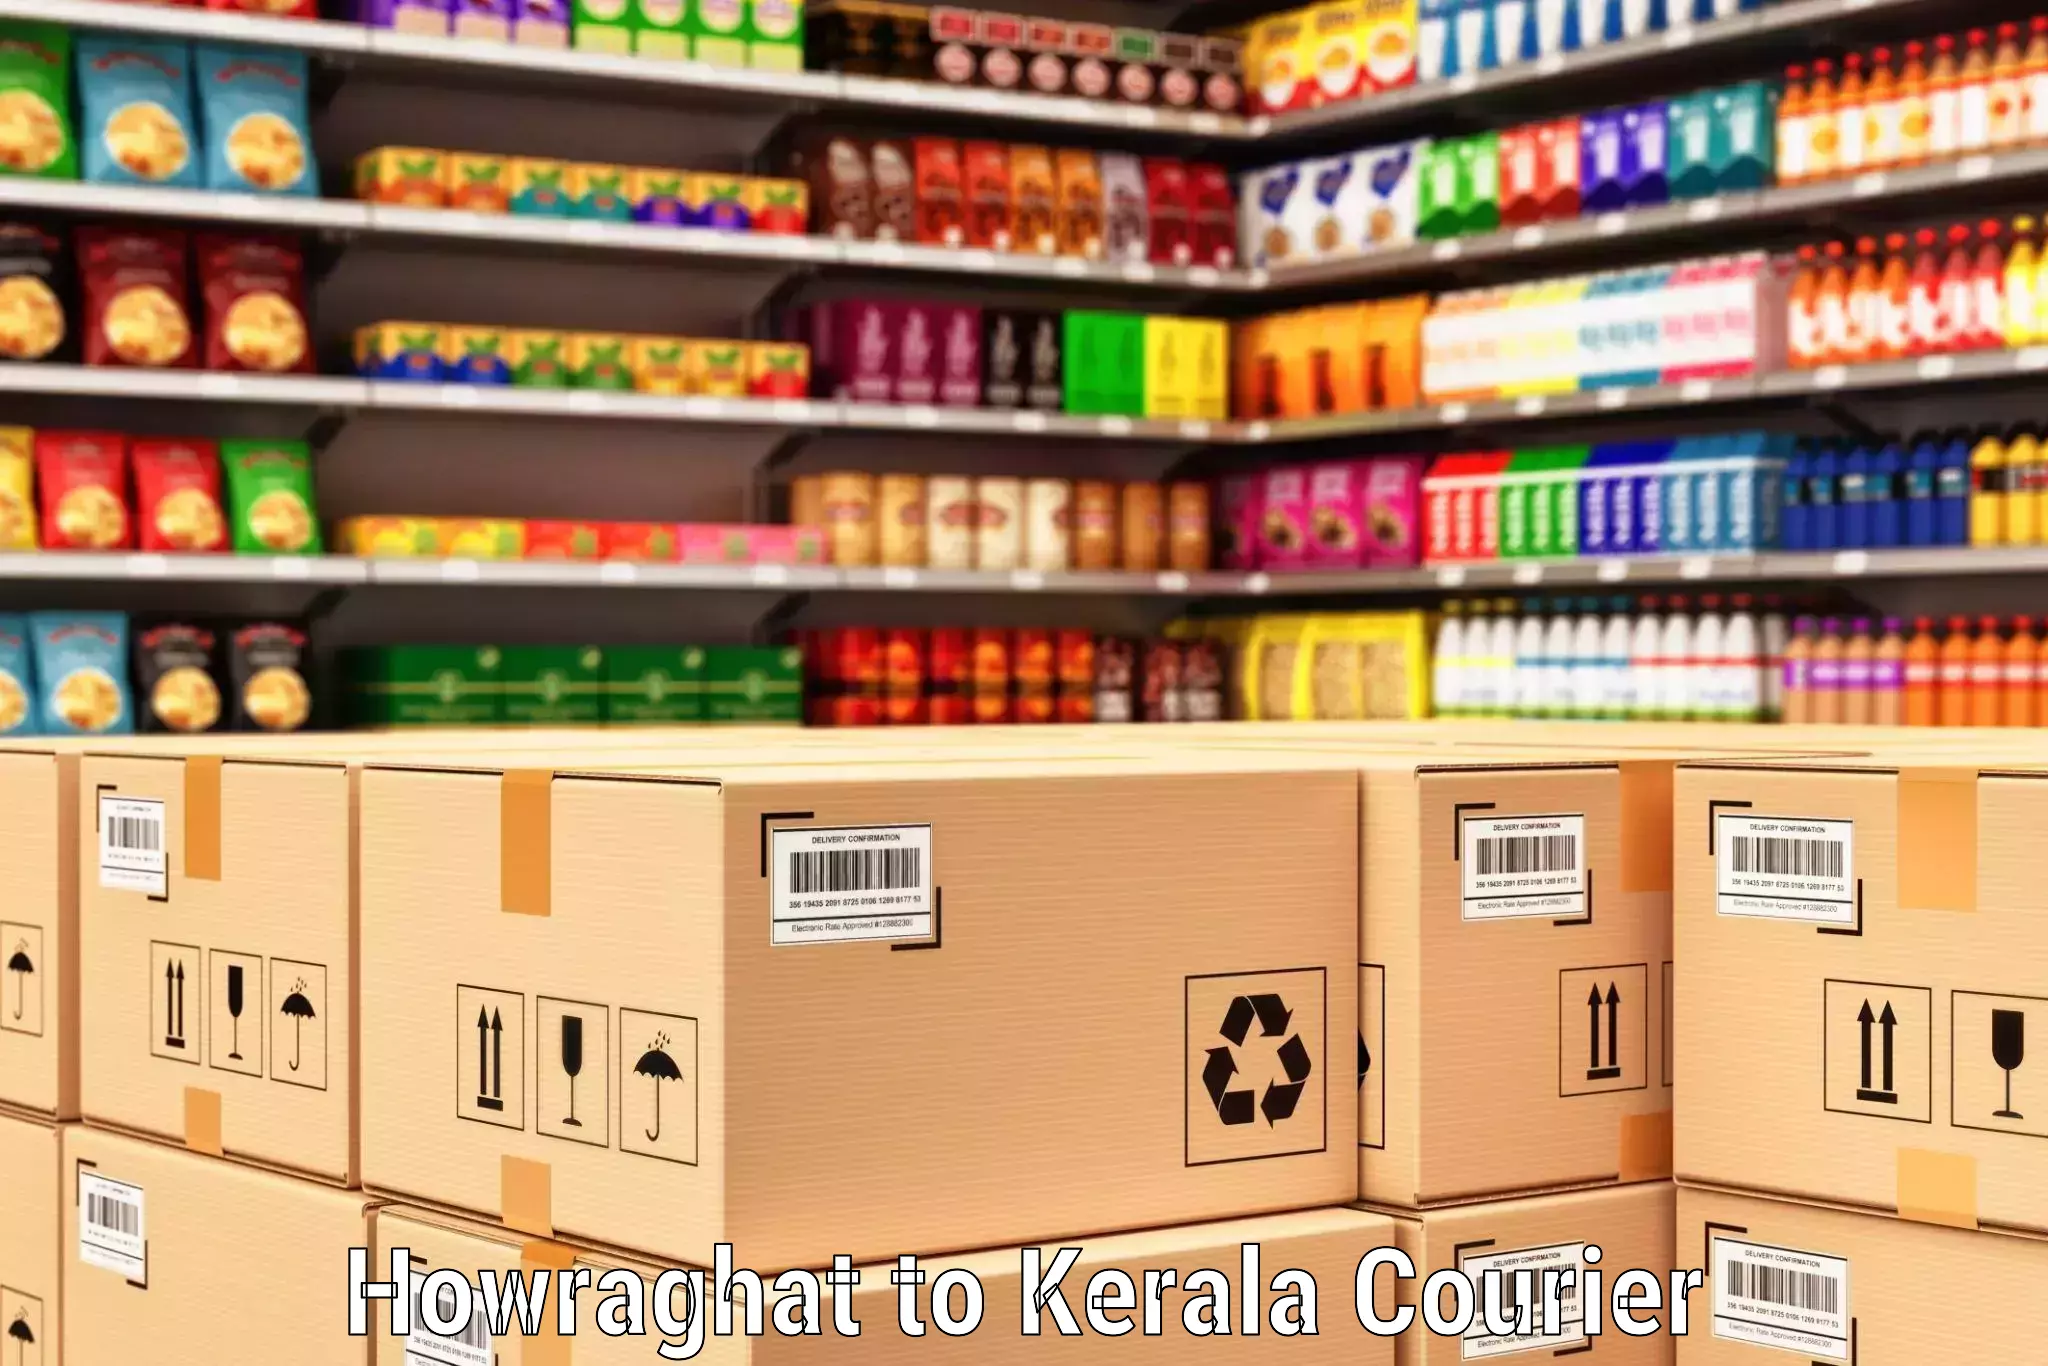 On-demand shipping options in Howraghat to Cochin Port Kochi